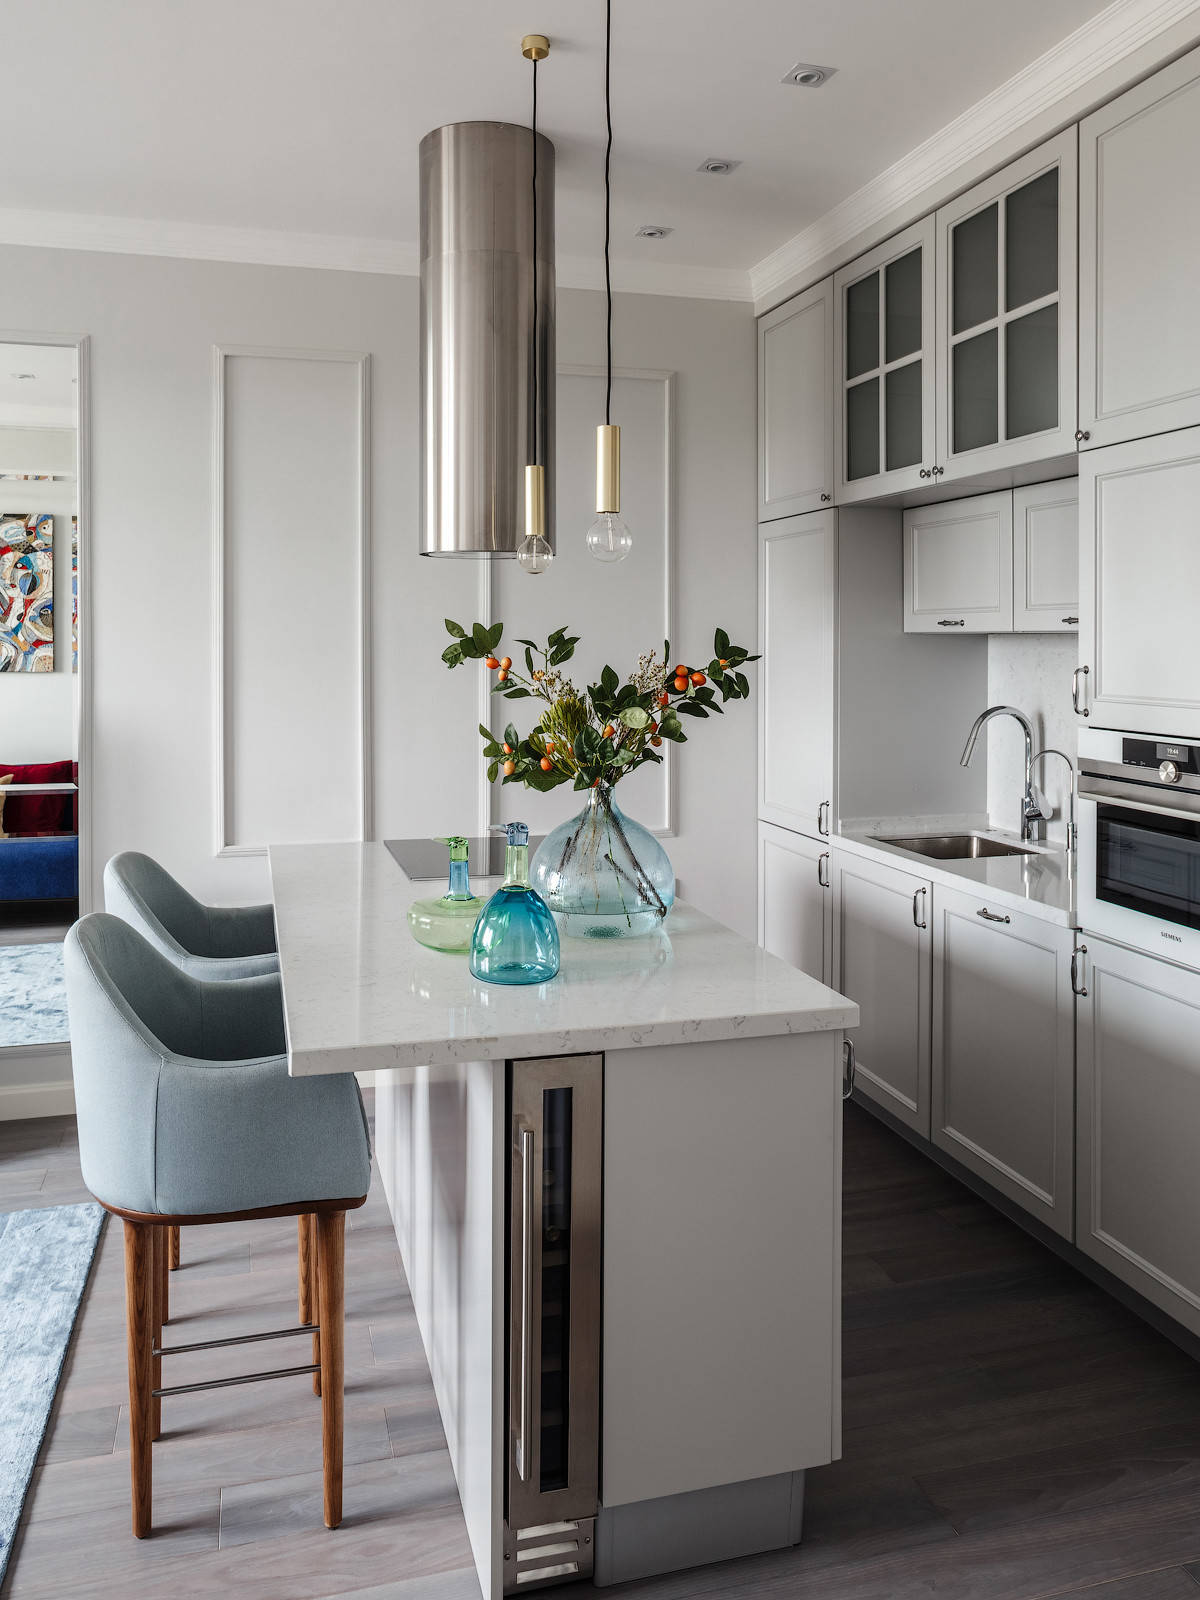 20 Small Kitchen Ideas You'll Love   June, 20   Houzz